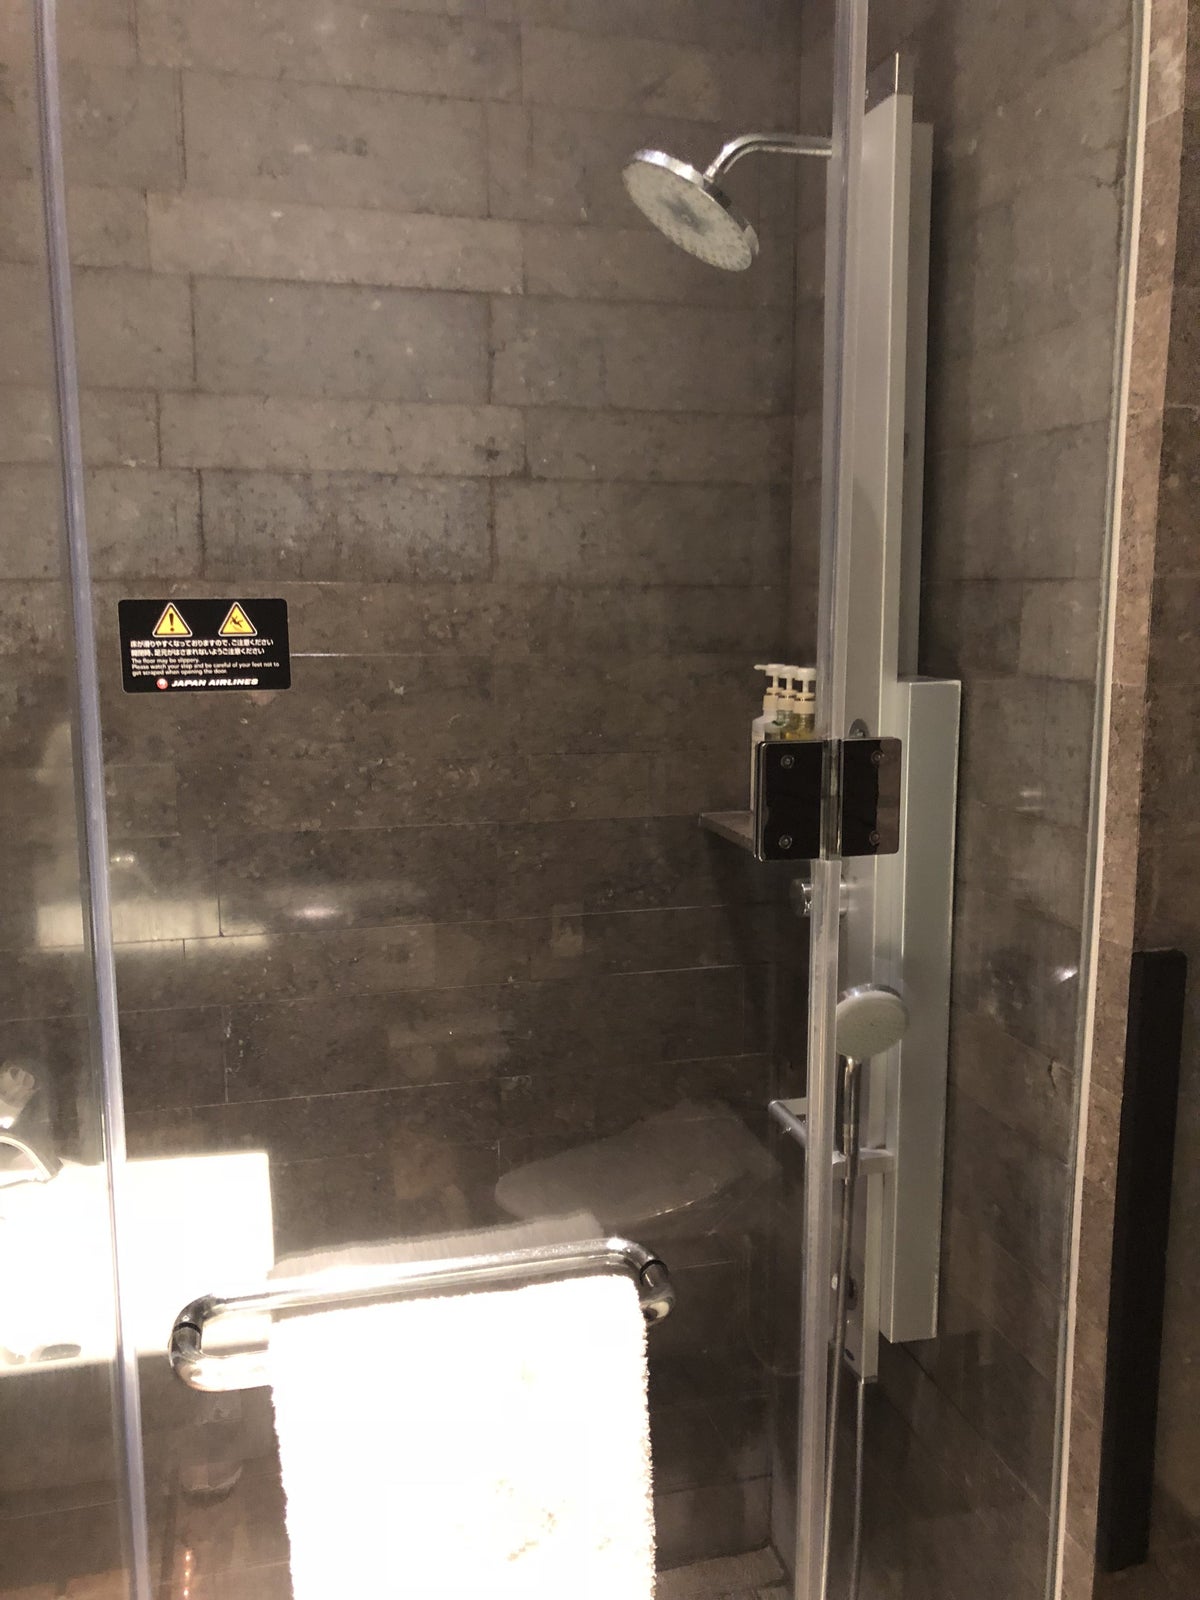 Japan Airlines First Class Lounge Showers